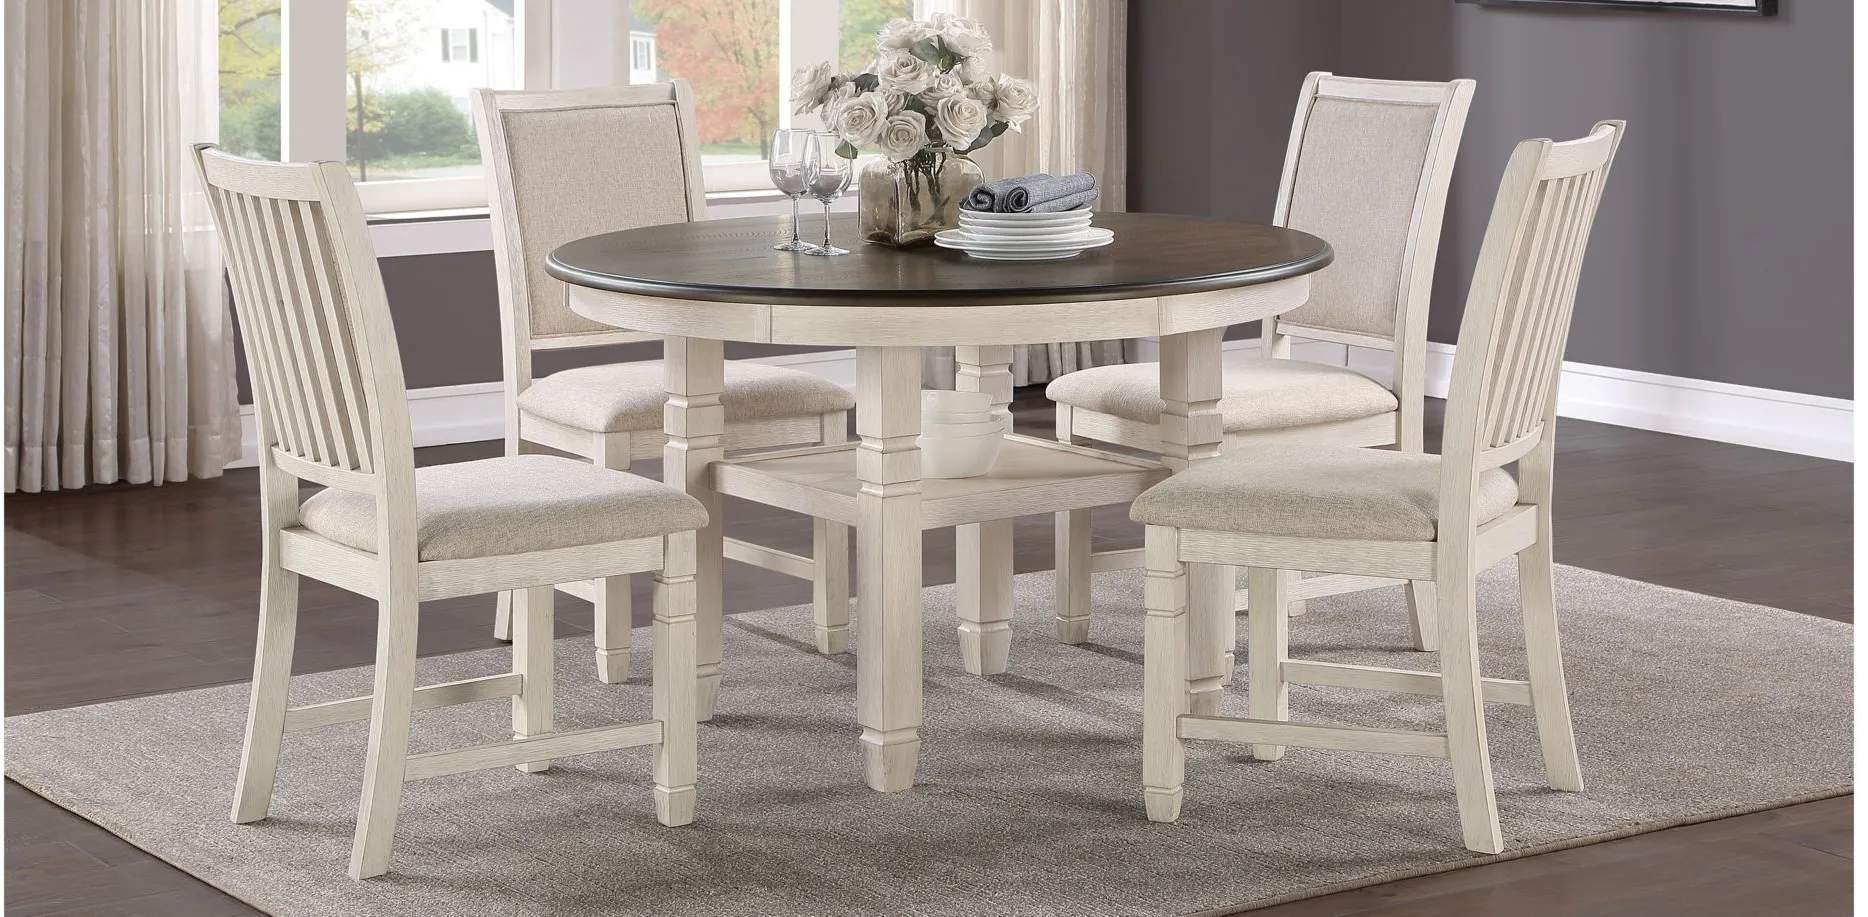 Arlana 5-pc Dining Set in Antique White by Homelegance